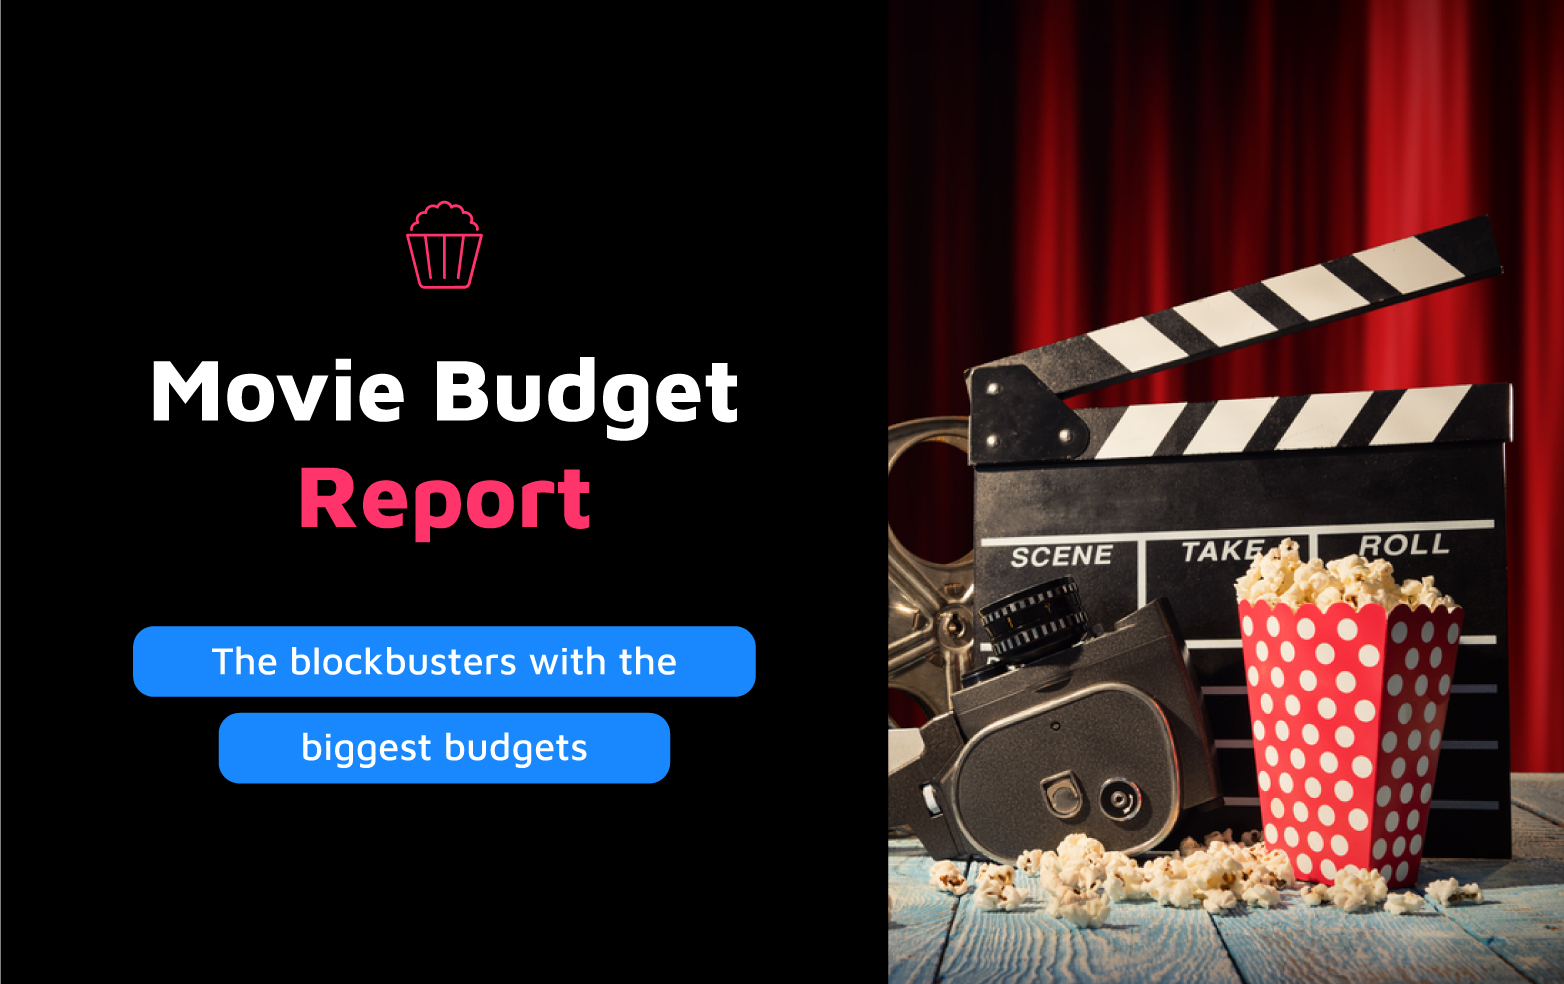 Blockbusters with Biggest Budgets